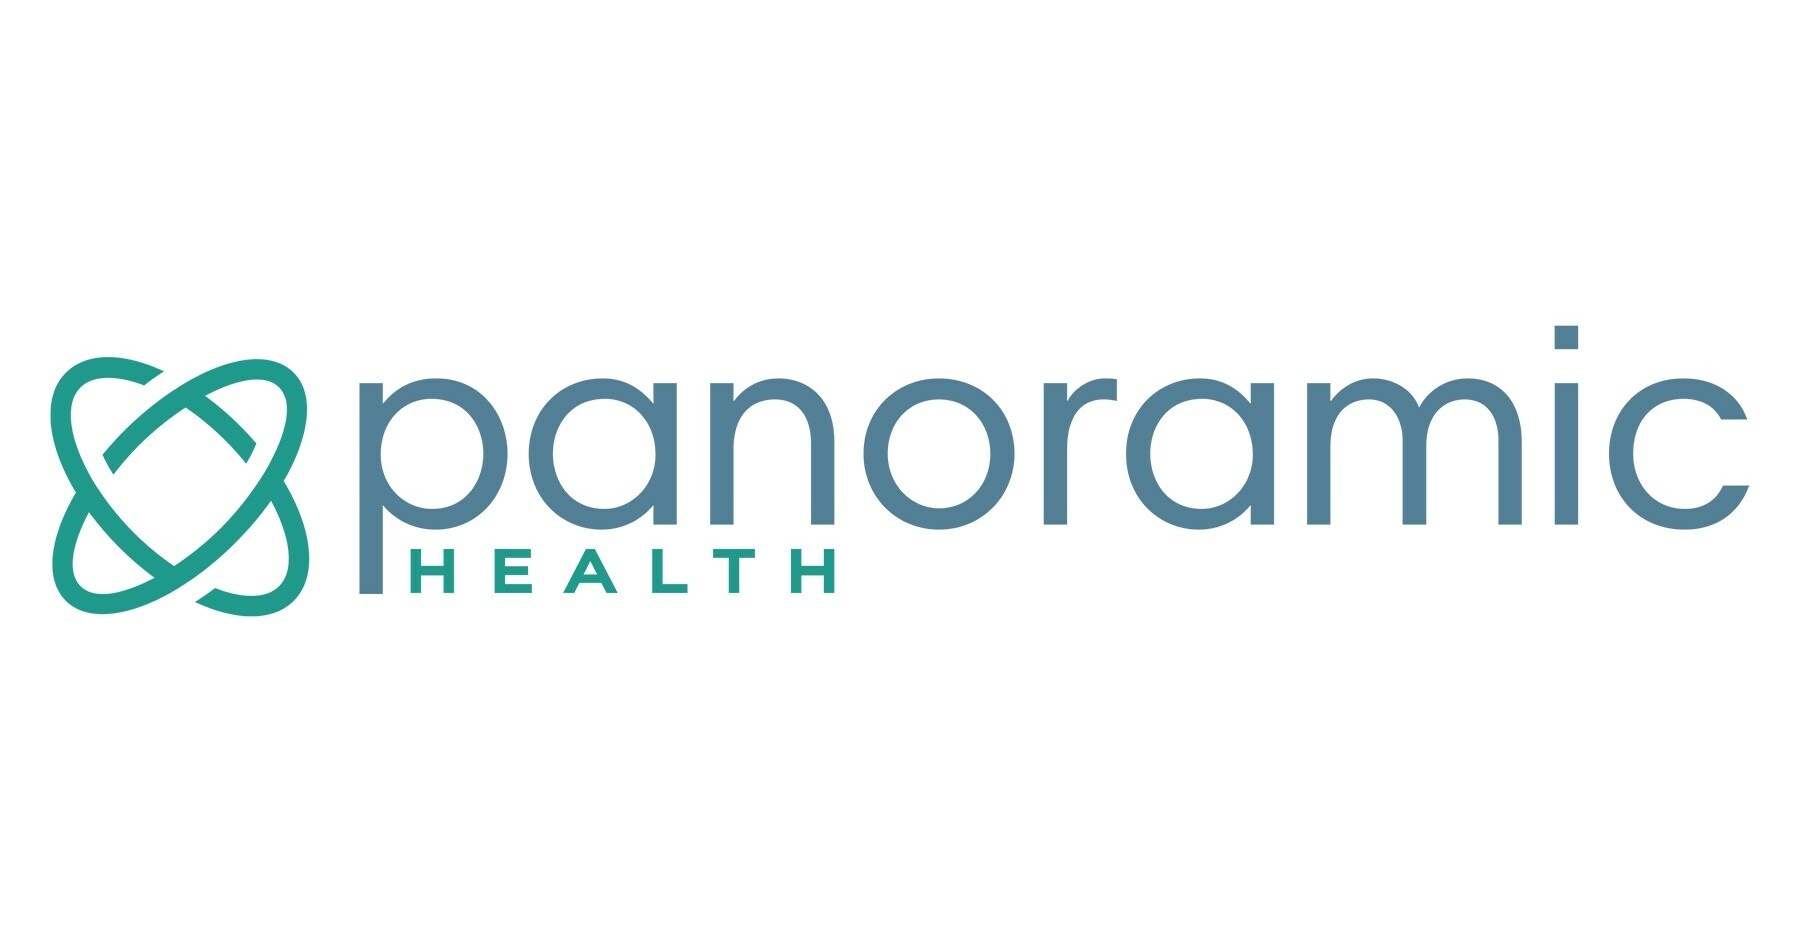  Panoramic Health Launches State-of-the-Art Ambulatory Surgery Center in Tampa, Florida 